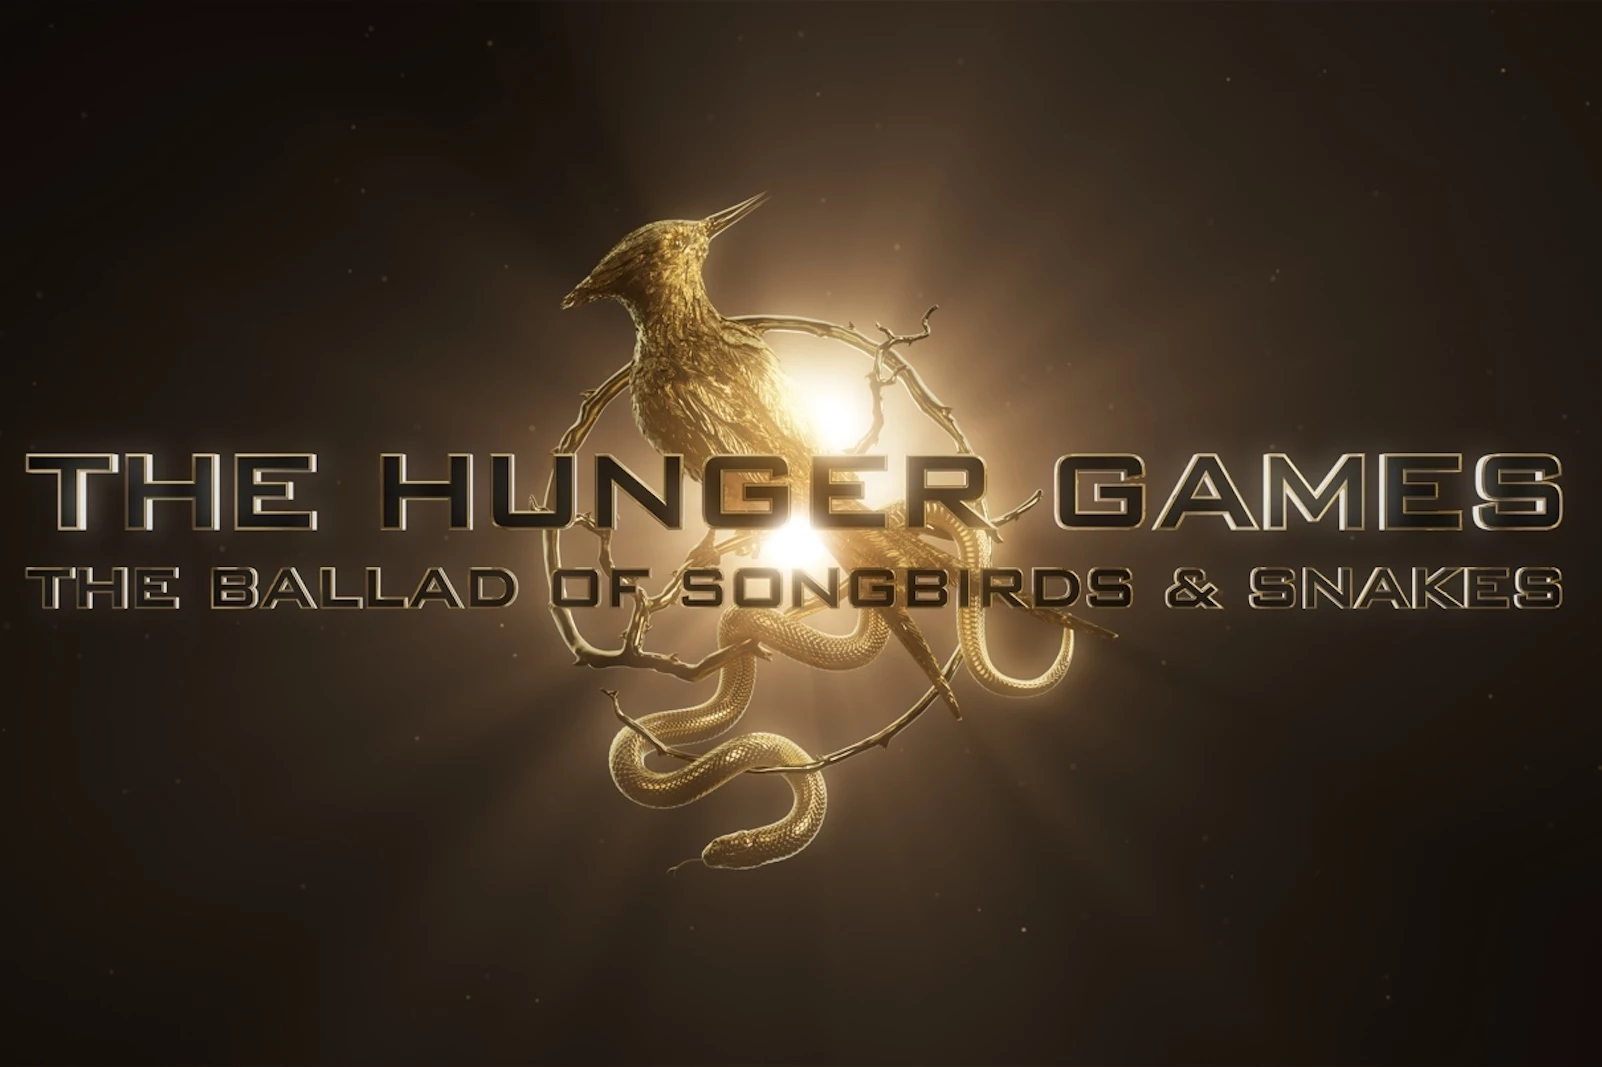 The New 'Hunger Games' Prequel Brings Postwar Americana Into the